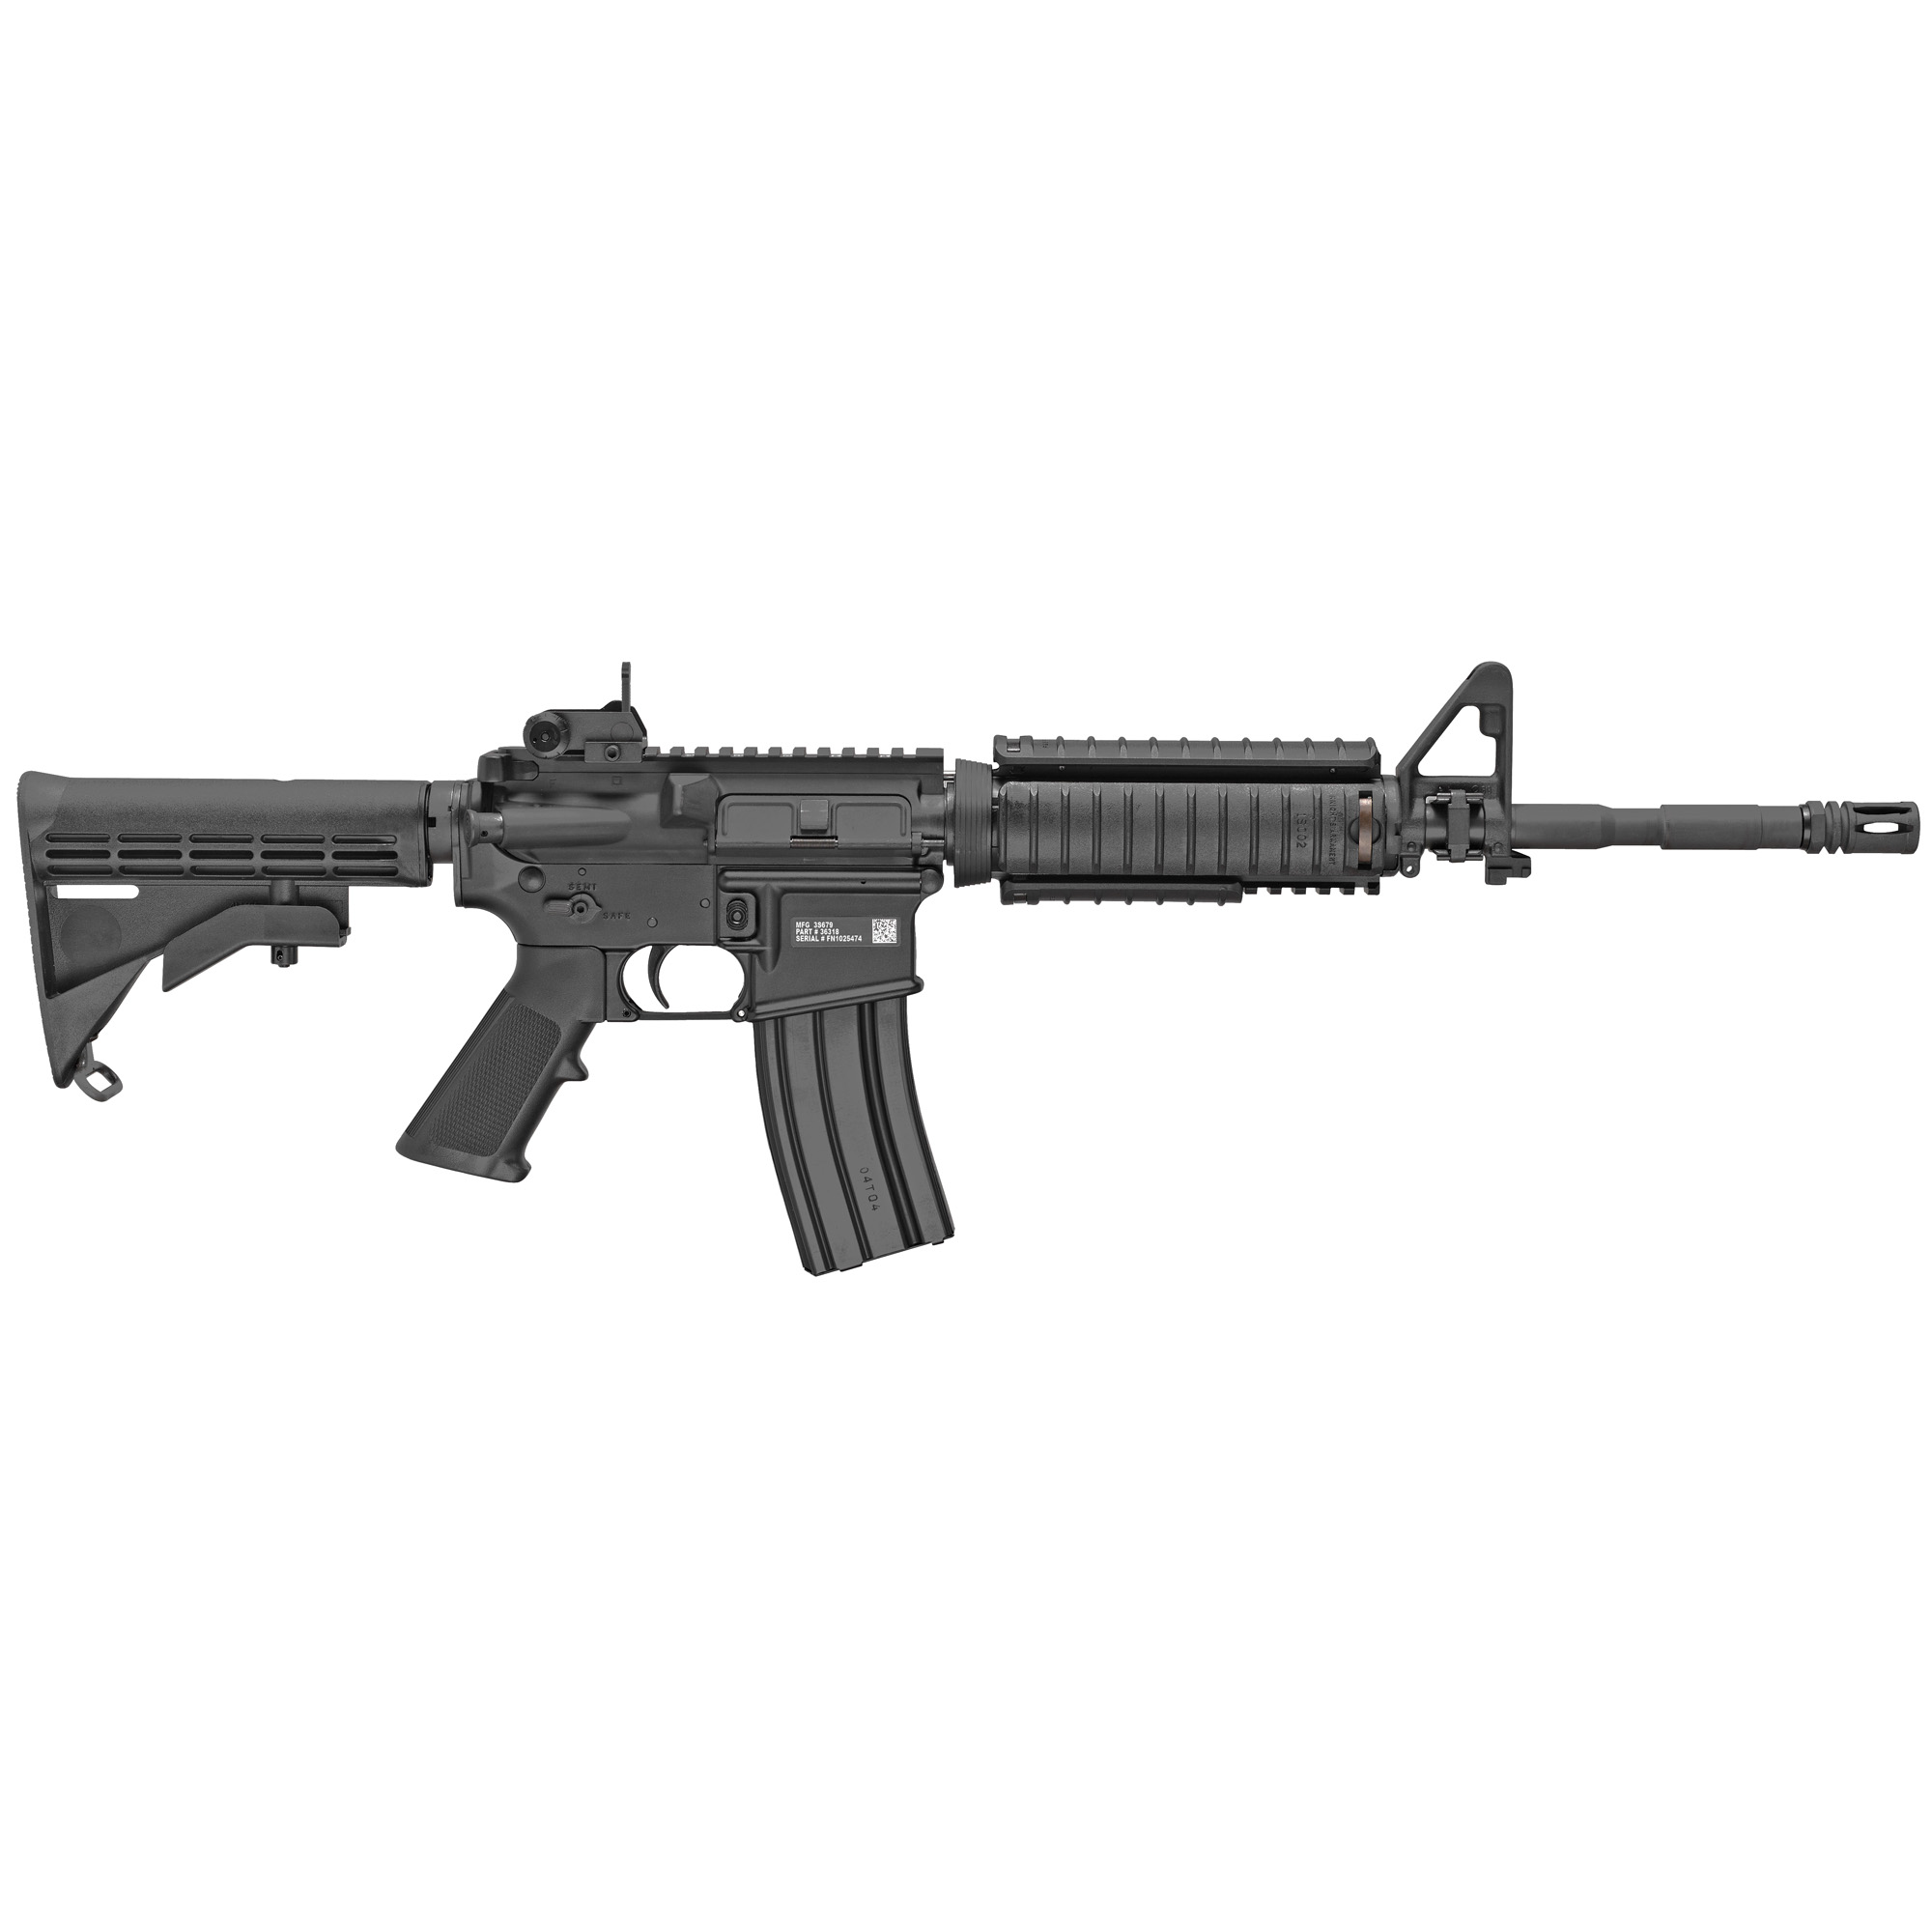 FNH America FN15 Military Collector M4 AR-15 Semi Auto Rifle 5.56 NATO 16" Barrel 30 rd. Knights RAS Adapter Rail Covers Collaps